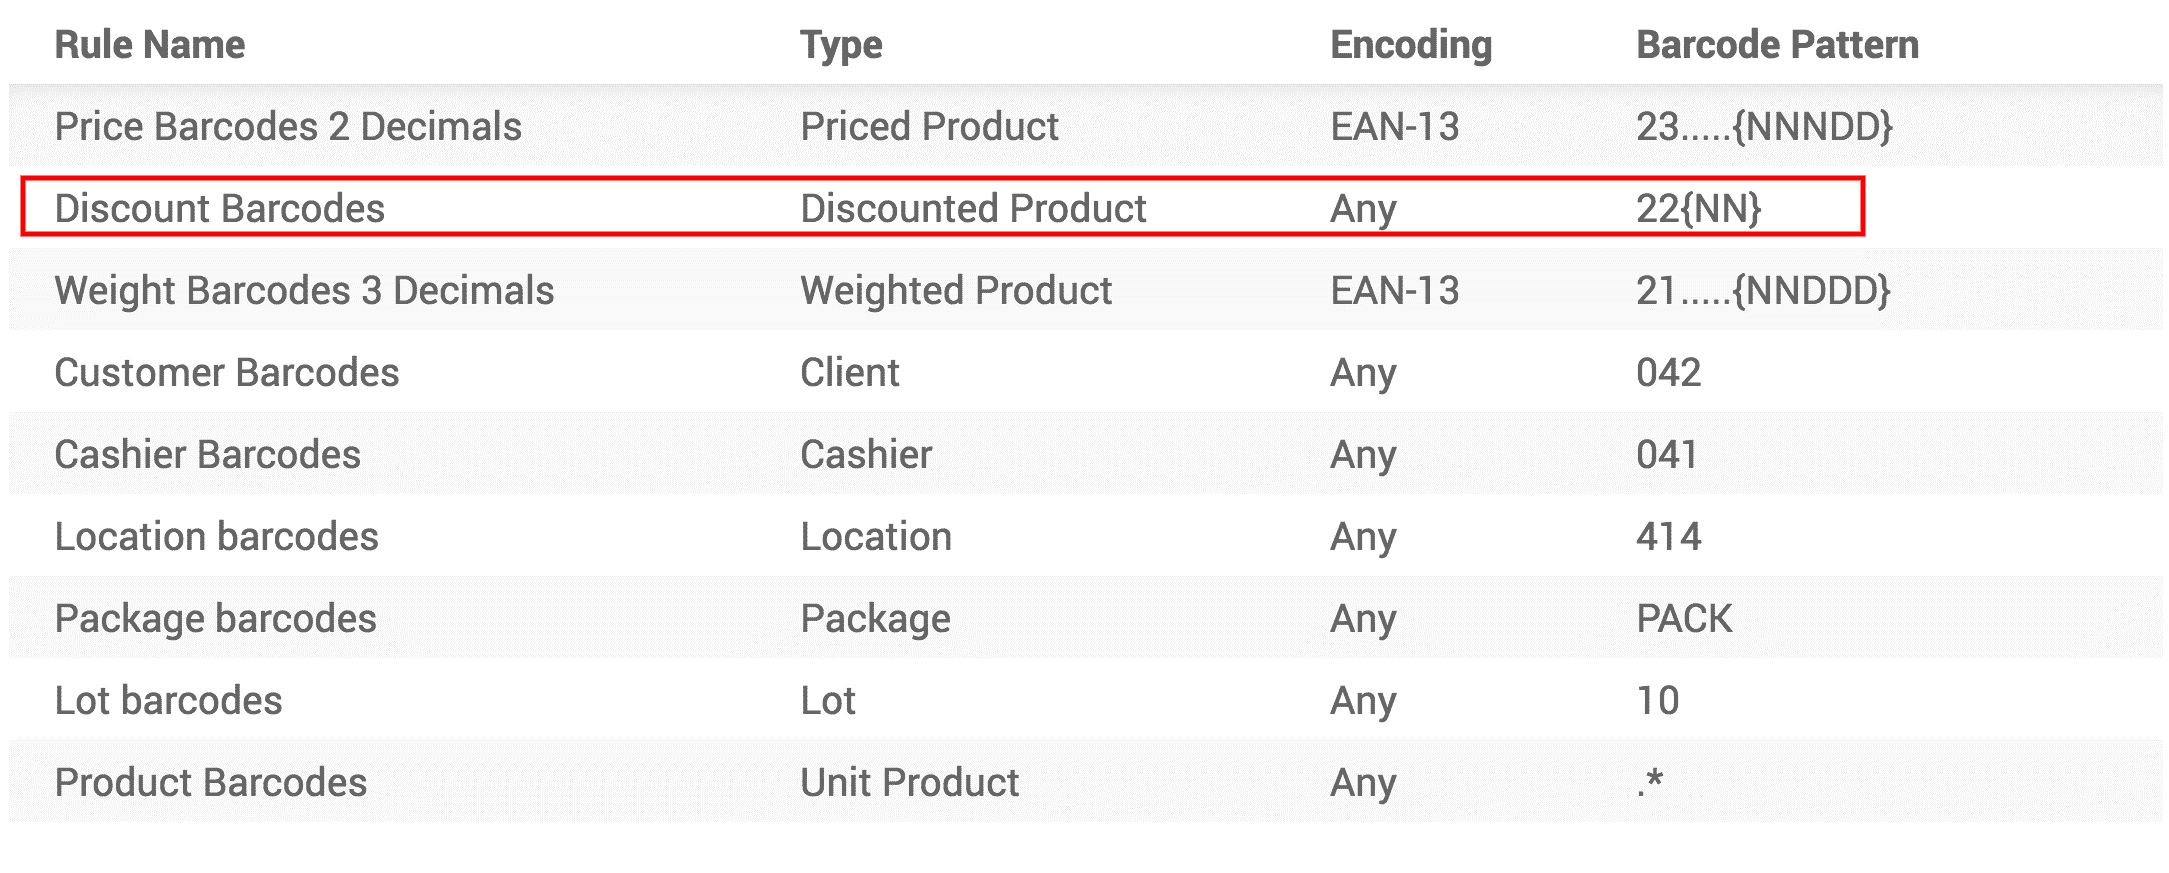 odoo 12 point of sale features